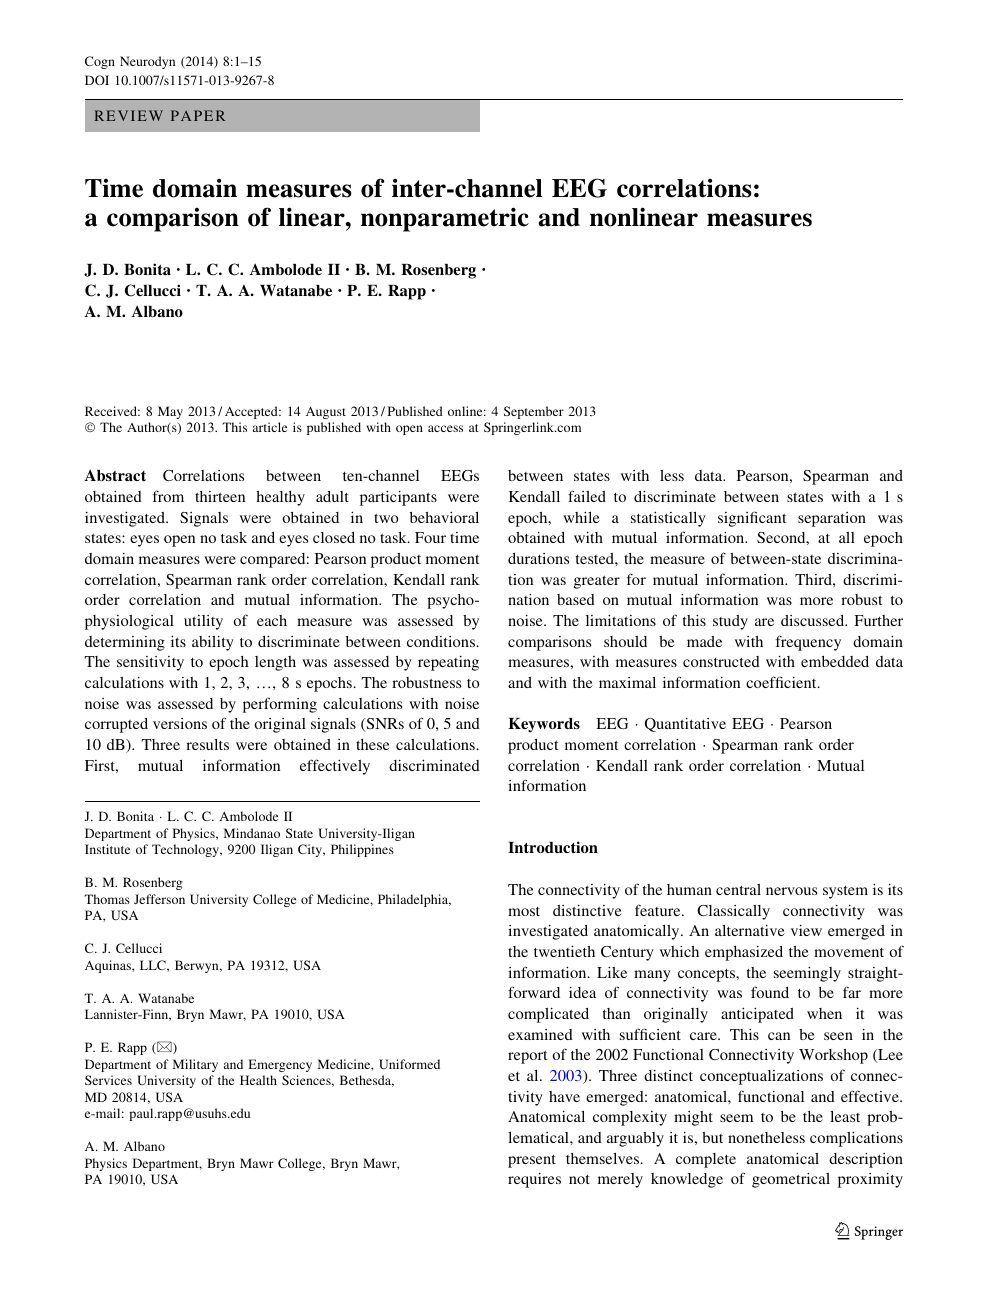 Time Domain Measures Of Inter Channel Eeg Correlations A Comparison Of Linear Nonparametric And Nonlinear Measures Topic Of Research Paper In Clinical Medicine Download Scholarly Article Pdf And Read For Free On